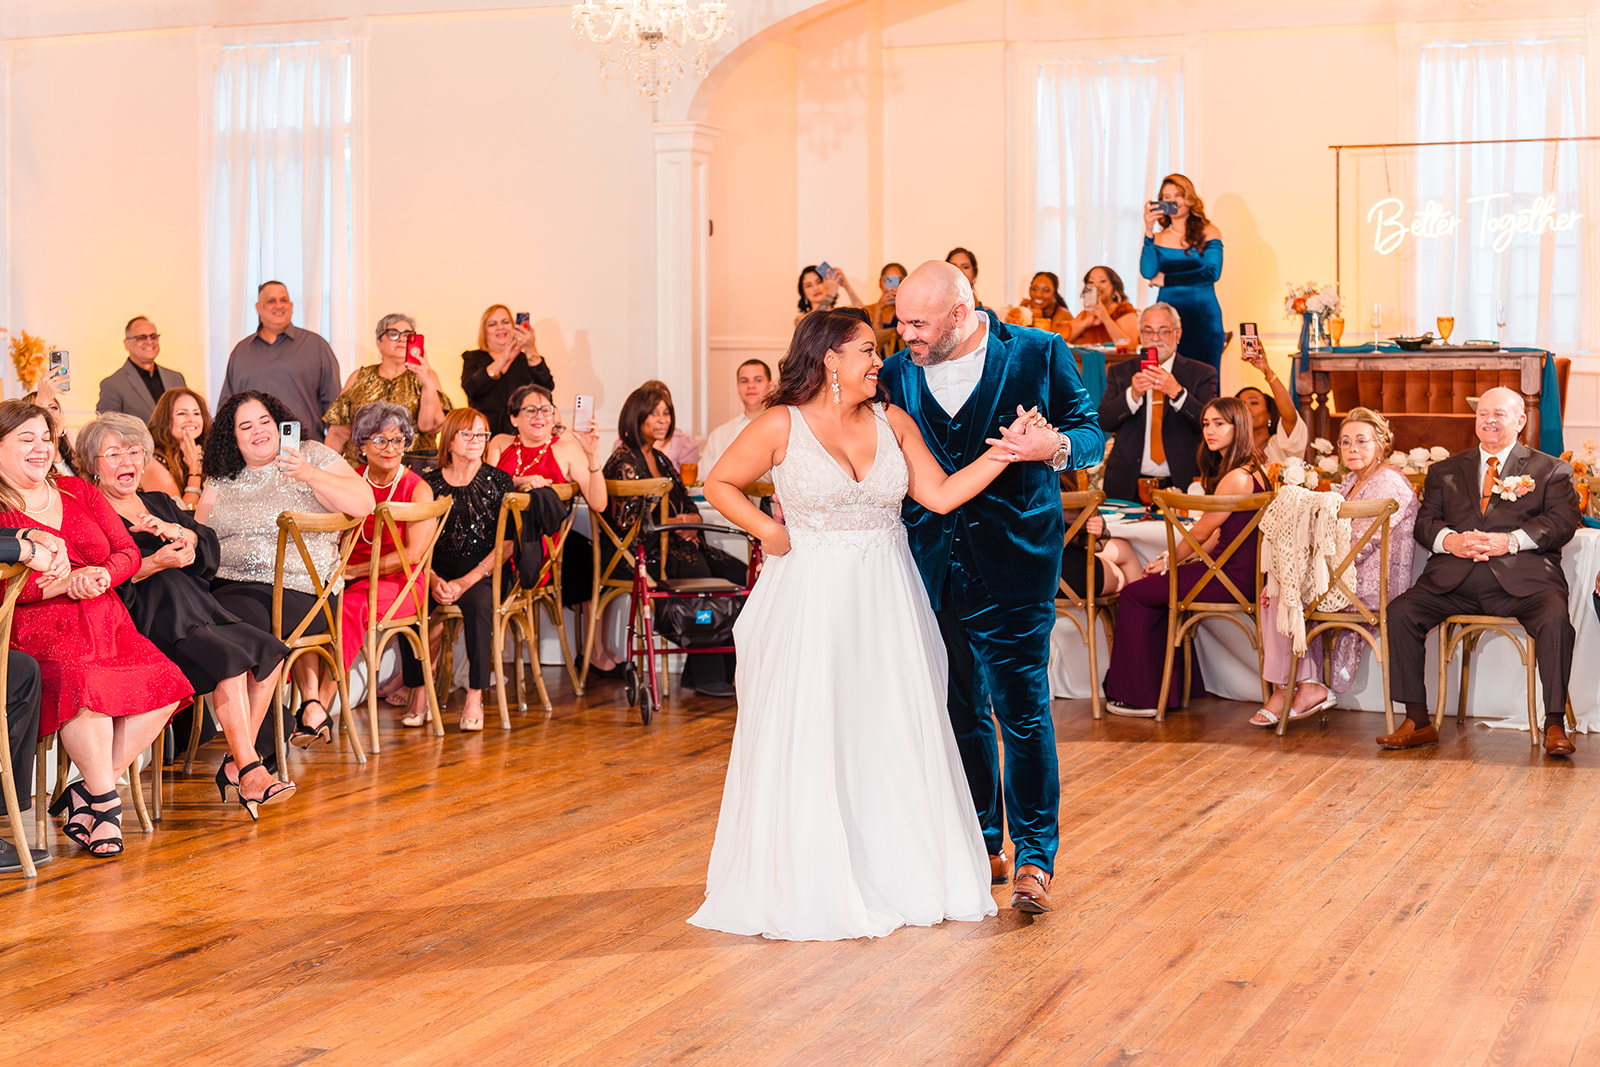 Close-up of the newlyweds' first dance at Venue 1902's reception hall, surrounded by smiling guests.